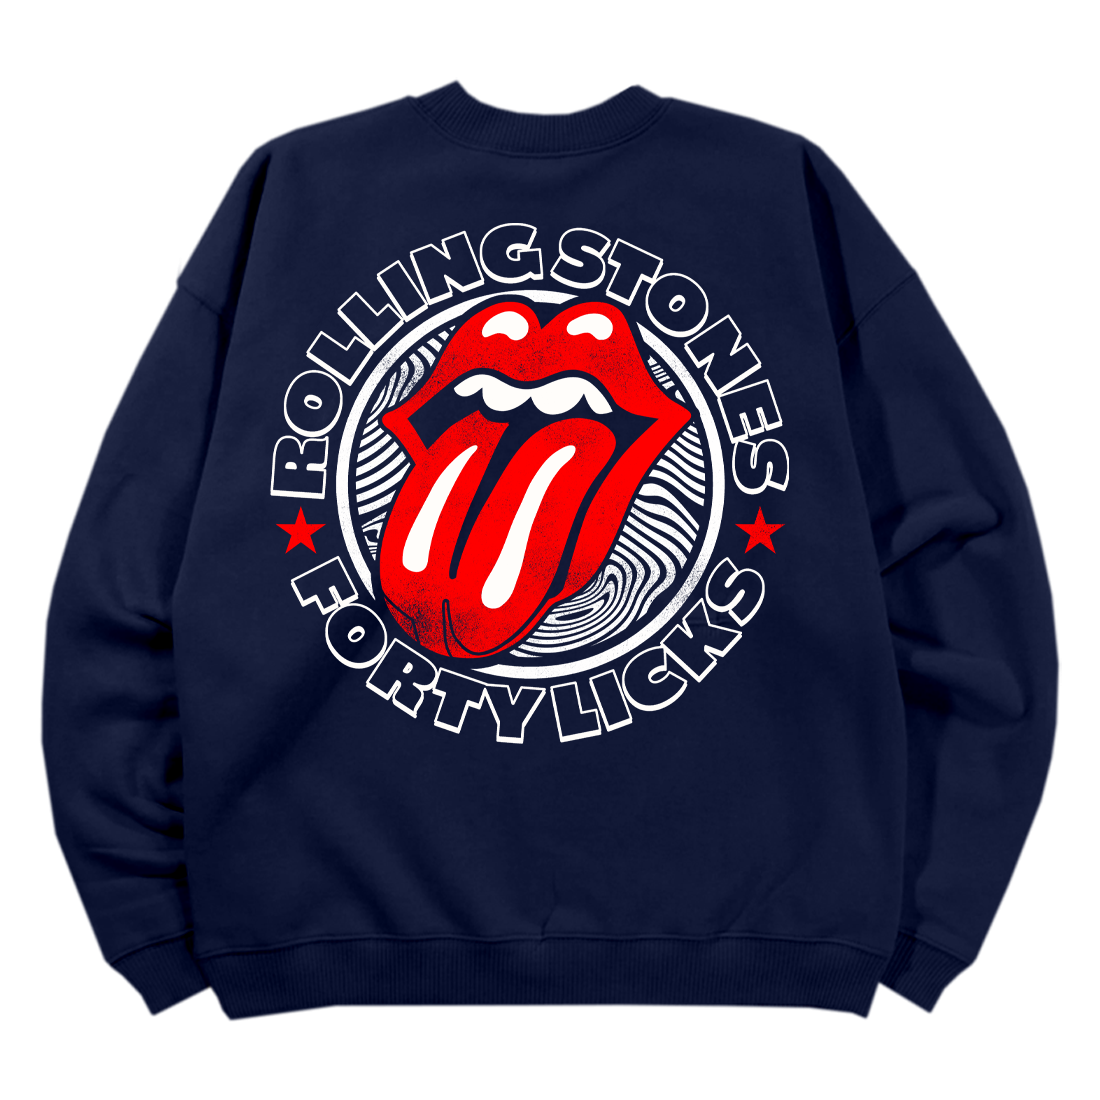 https://images.bravado.de/prod/product-assets/product-asset-data/rolling-stones-the/the-rolling-stones/products/503889/web/391246/image-thumb__391246__3000x3000_original/The-Rolling-Stones-Forty-Licks-Longsleeves-navy-503889-391246.5549c768.png